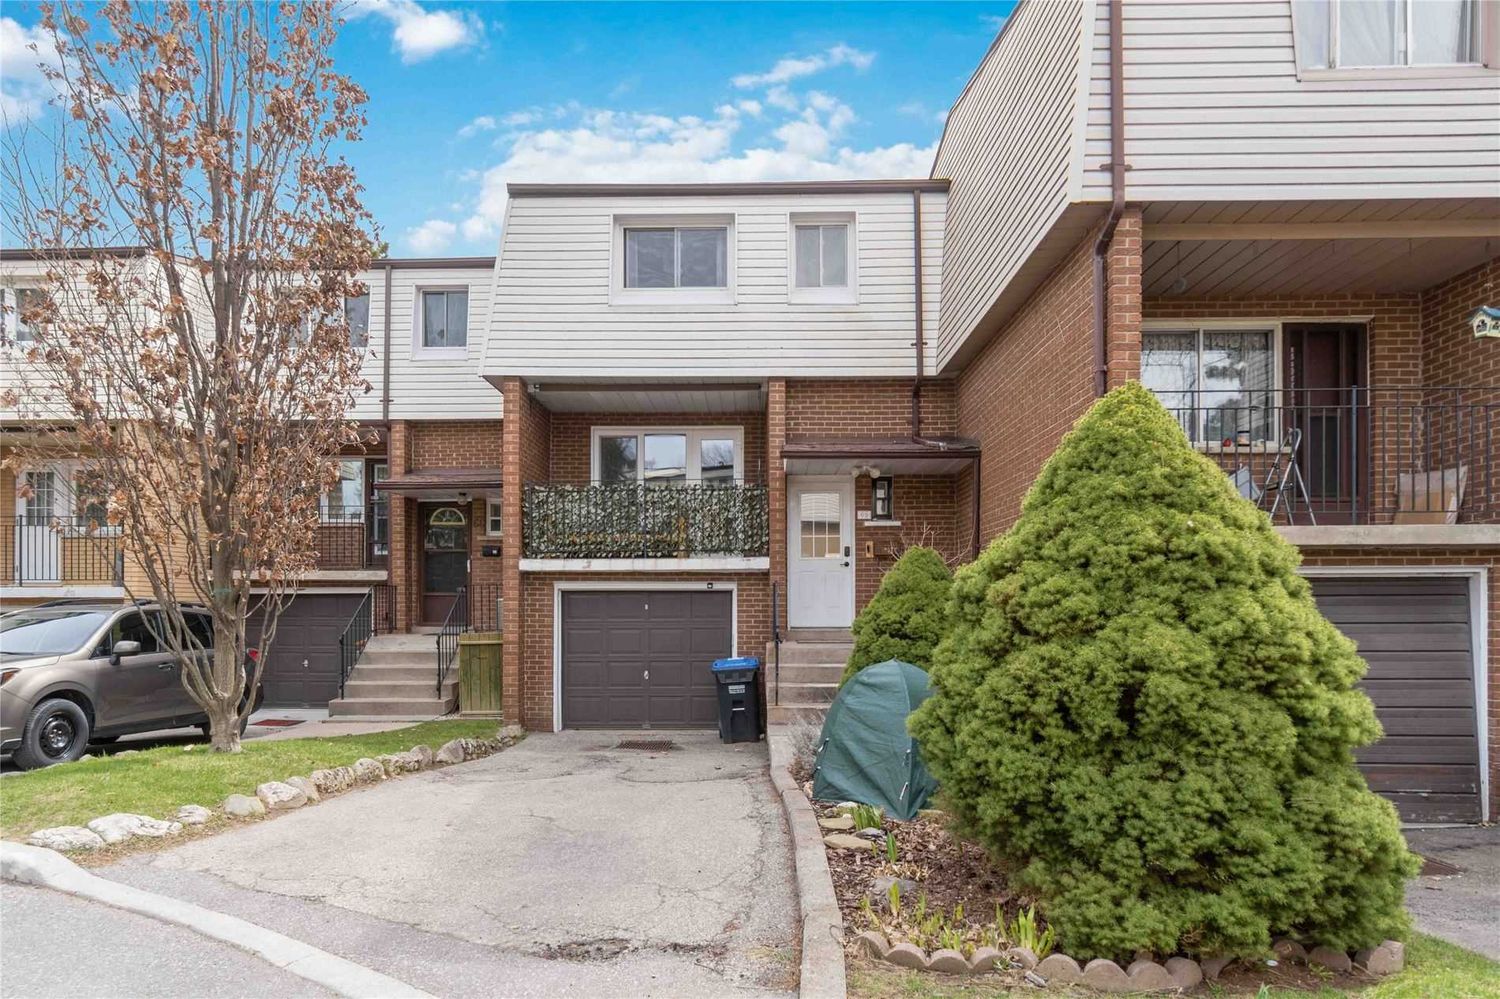 3175 Kirwin Avenue. 3175 Kirwin Avenue Townhomes is located in  Mississauga, Toronto - image #1 of 2